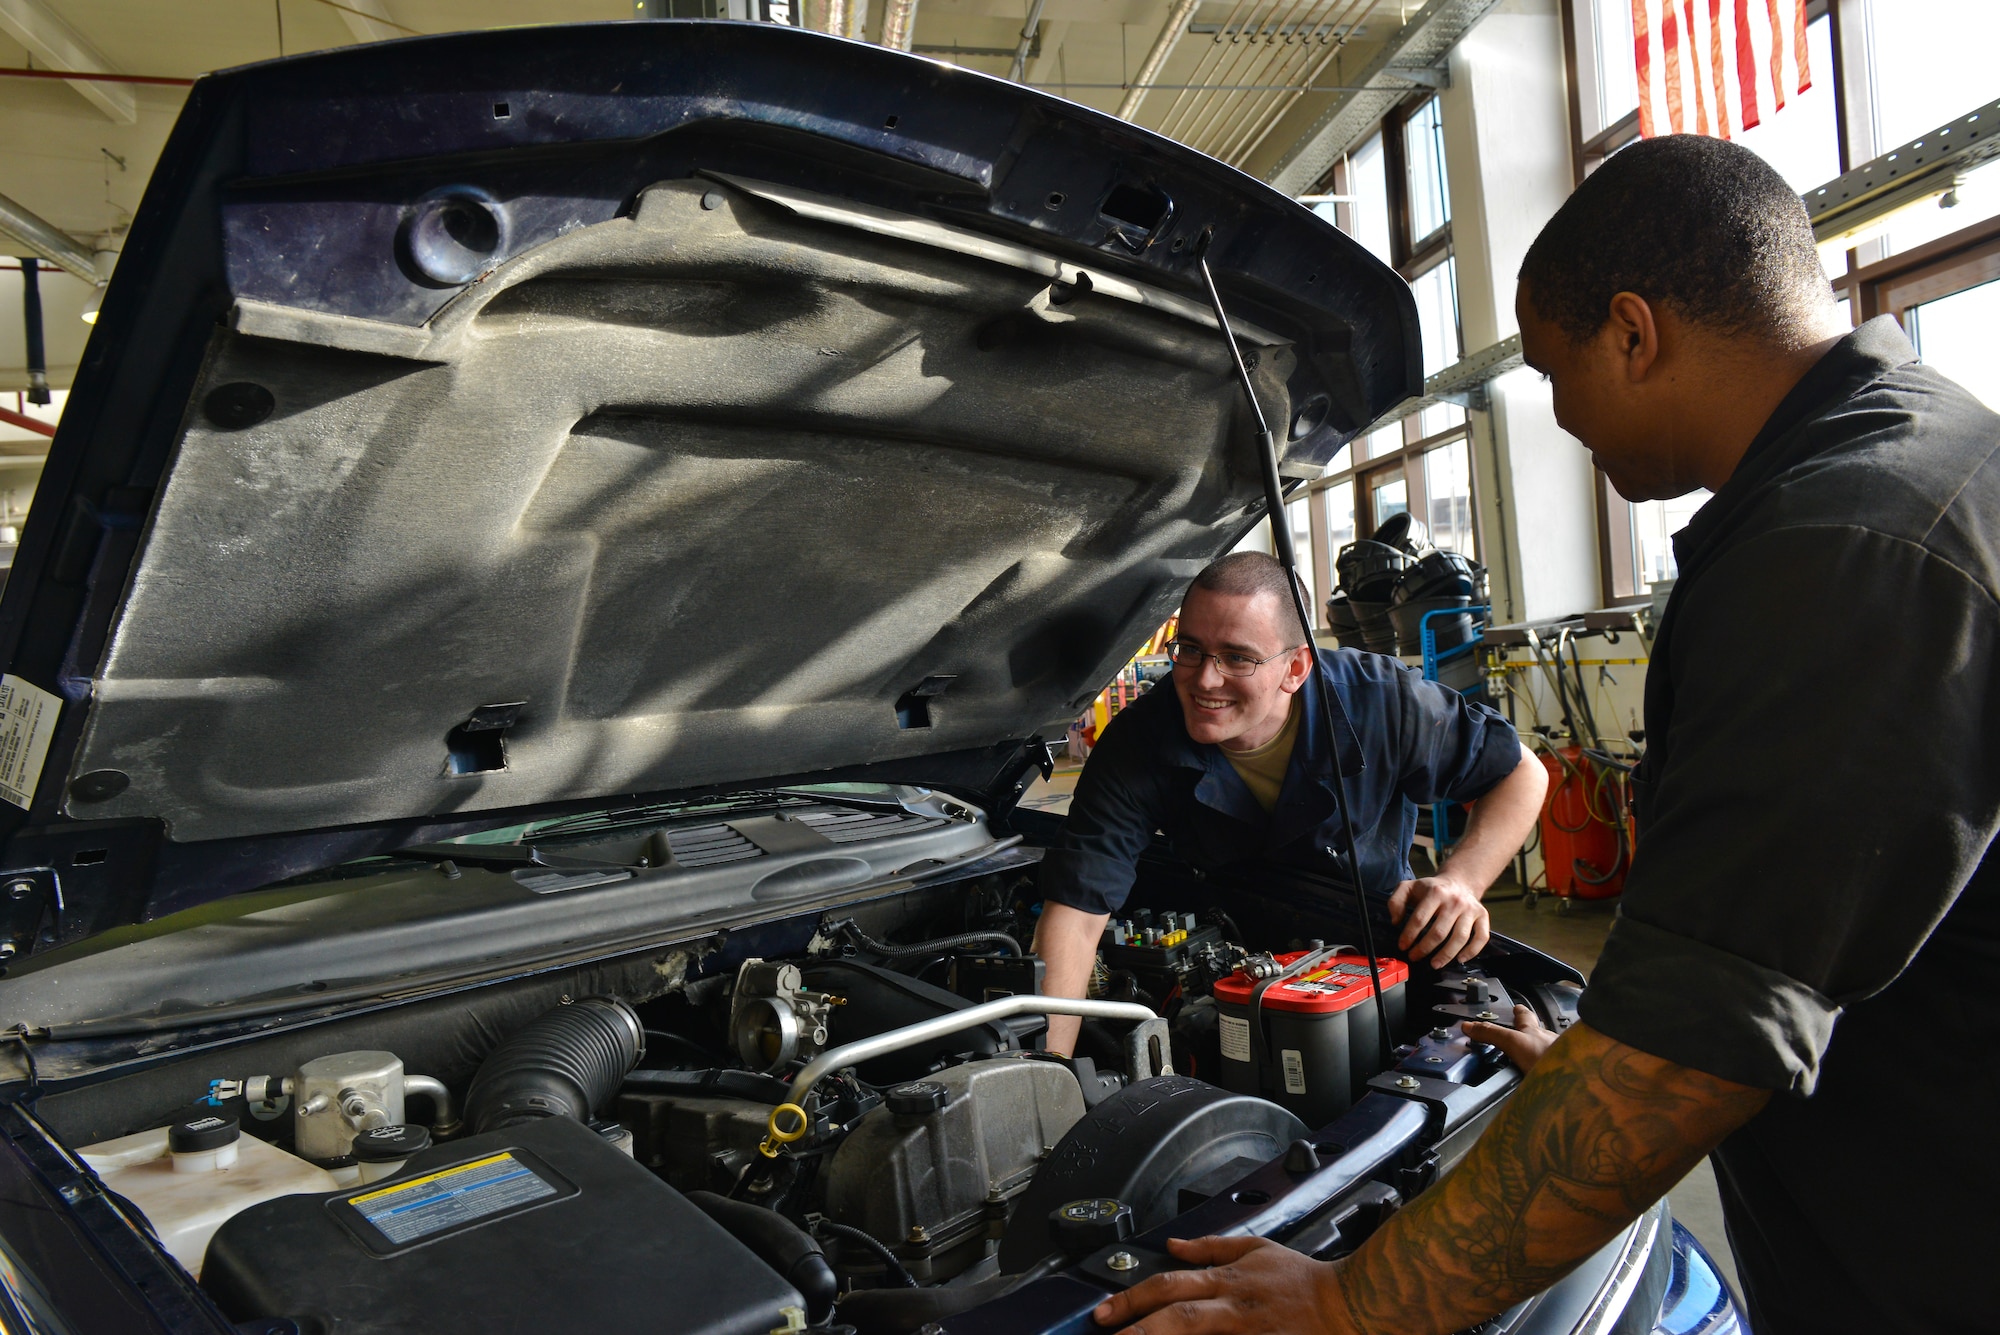 Airman 1st Class Frederick Vogelgesang, 86th Vehicle Readiness Squadron general purpose light vehicle mechanic, works under a truck at Ramstein Air Base, Germany, Jan. 14, 2015. The 86th VRS is responsible for servicing more than 1000 vehicles on and off base. (U.S. Air Force photo by Senior Airman Nicole Sikorski/Released)